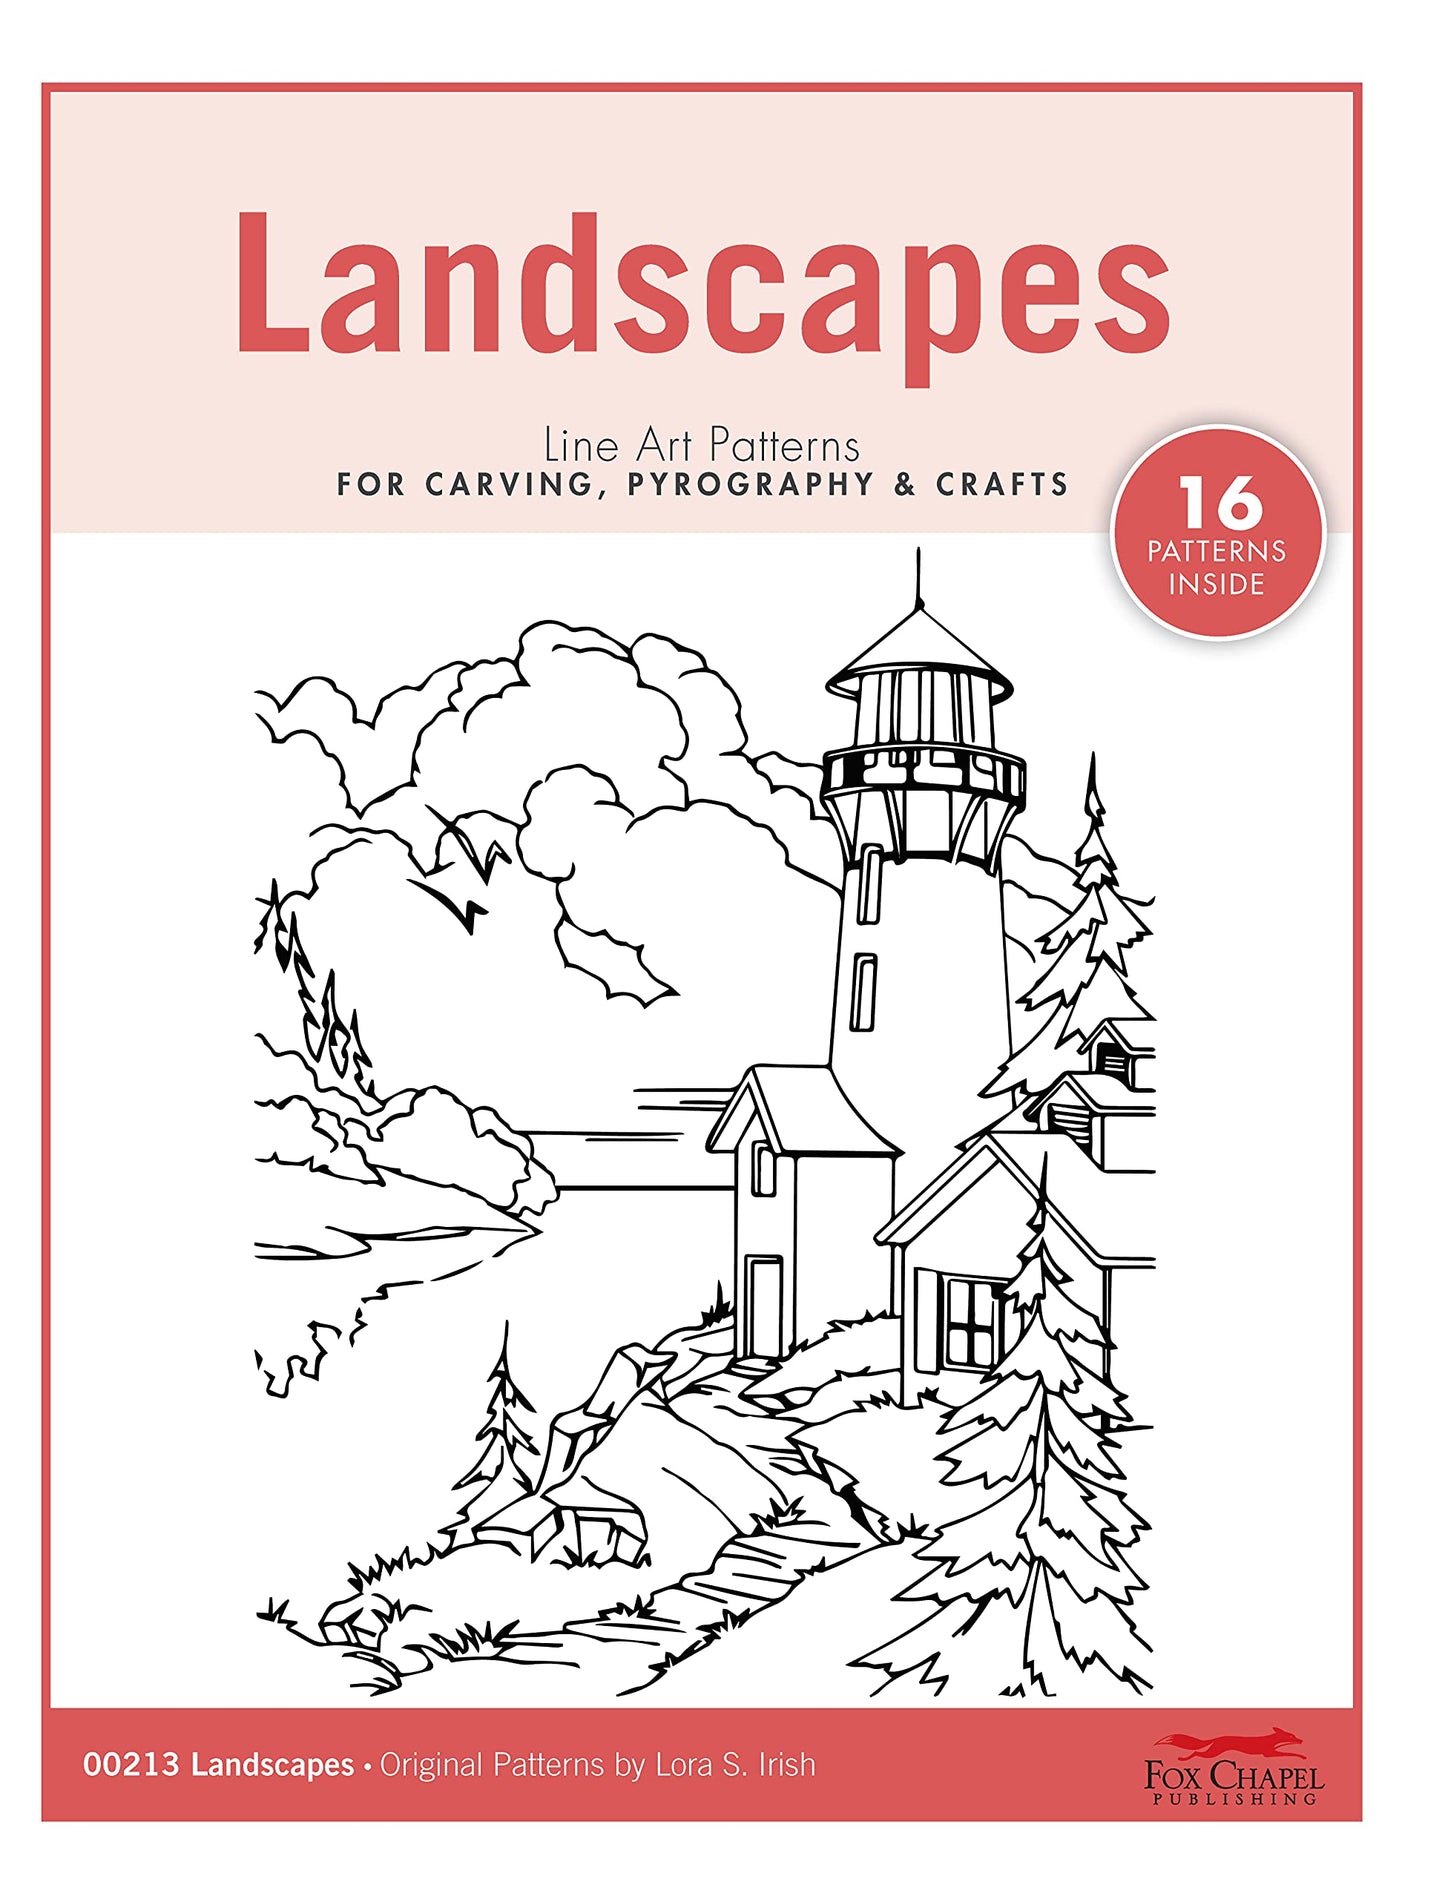 Landscapes Line Art Patterns for Carving, Pyrography & Crafts (Fox Chapel Publishing) 16 Original Designs by Lora Irish of Lighthouses, Barns, Farms, Churches, Water Wheels, Mountain Cabins, and More